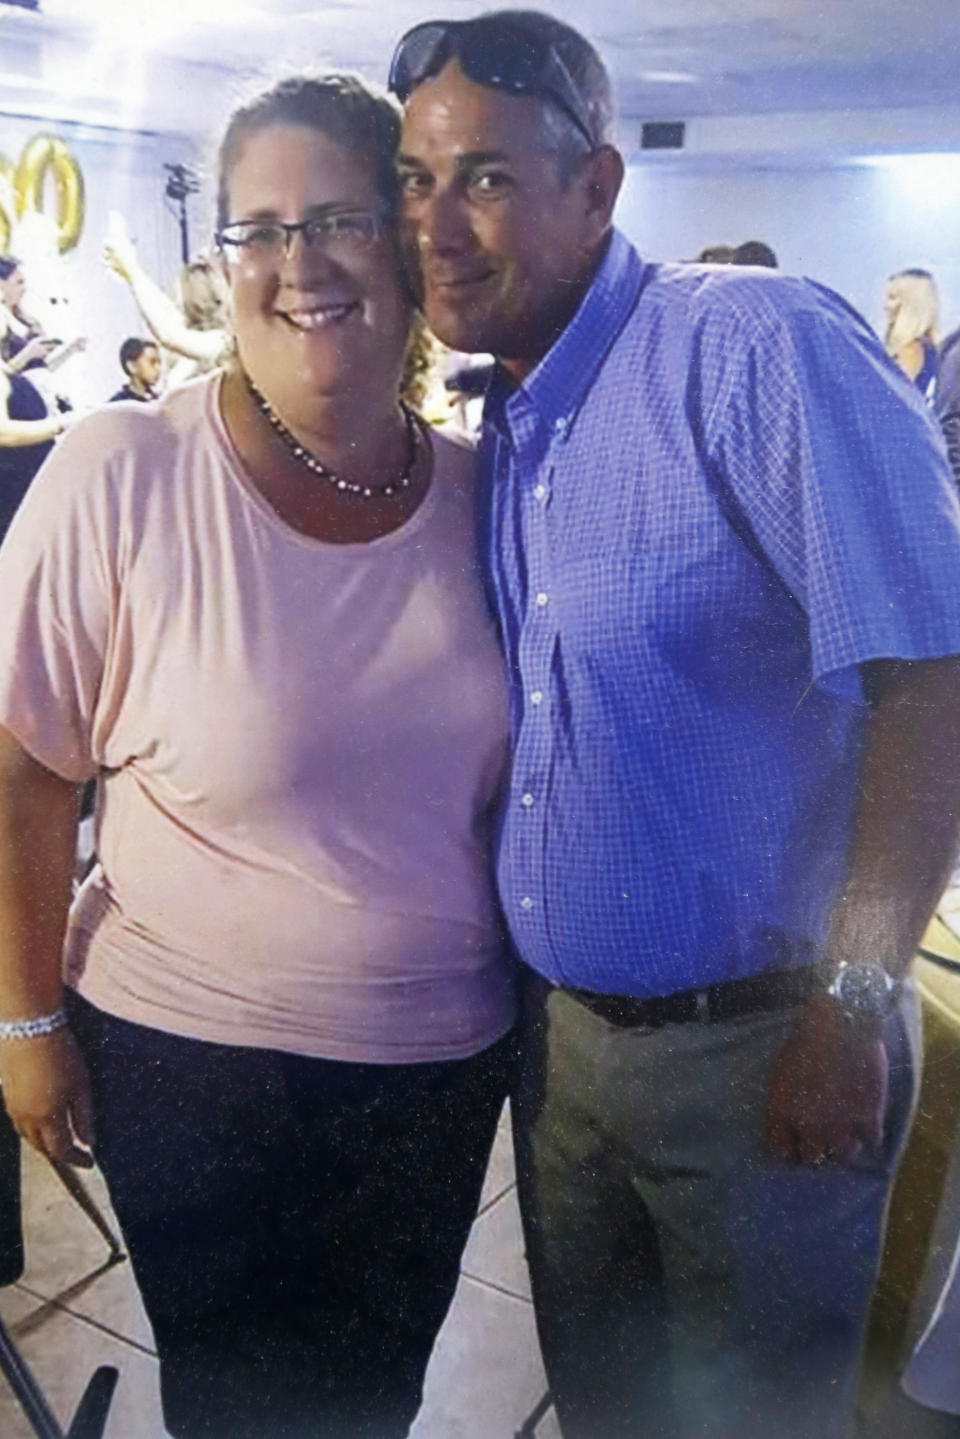 This undated image provided by Jason Nixon, shows a photo of Jason and his wife Kate Nixon, prior to last years shooting that took the life of Kate Nixon in Virginia Beach, Va. As the shooting's one-year anniversary approaches, some of the victim's family members say the rampage is effectively forgotten. “We were a flash in the pan,” Nixon said. “I think that we should have had a lot more attention. It’s not normal for someone to wake up and go murder 12 people.” (Jason Nixon via AP)